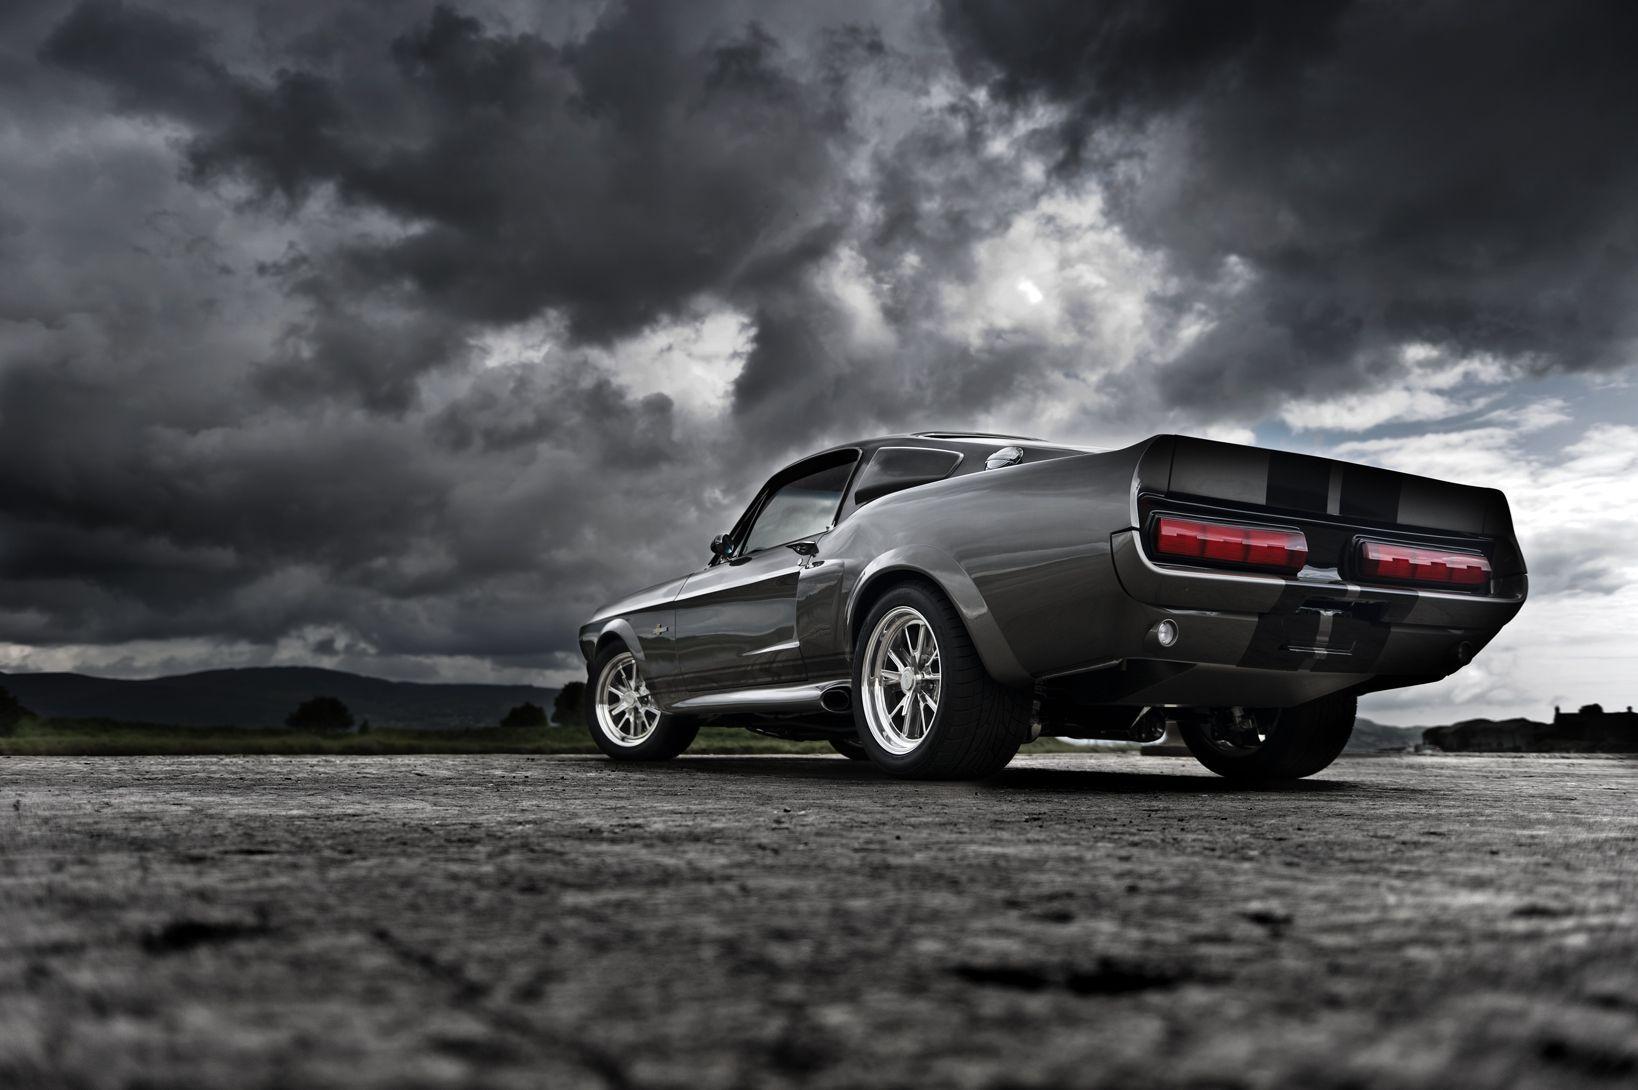 1969 Shelby Mustang GT500 Fastback Wallpapers - Wallpaper Cave